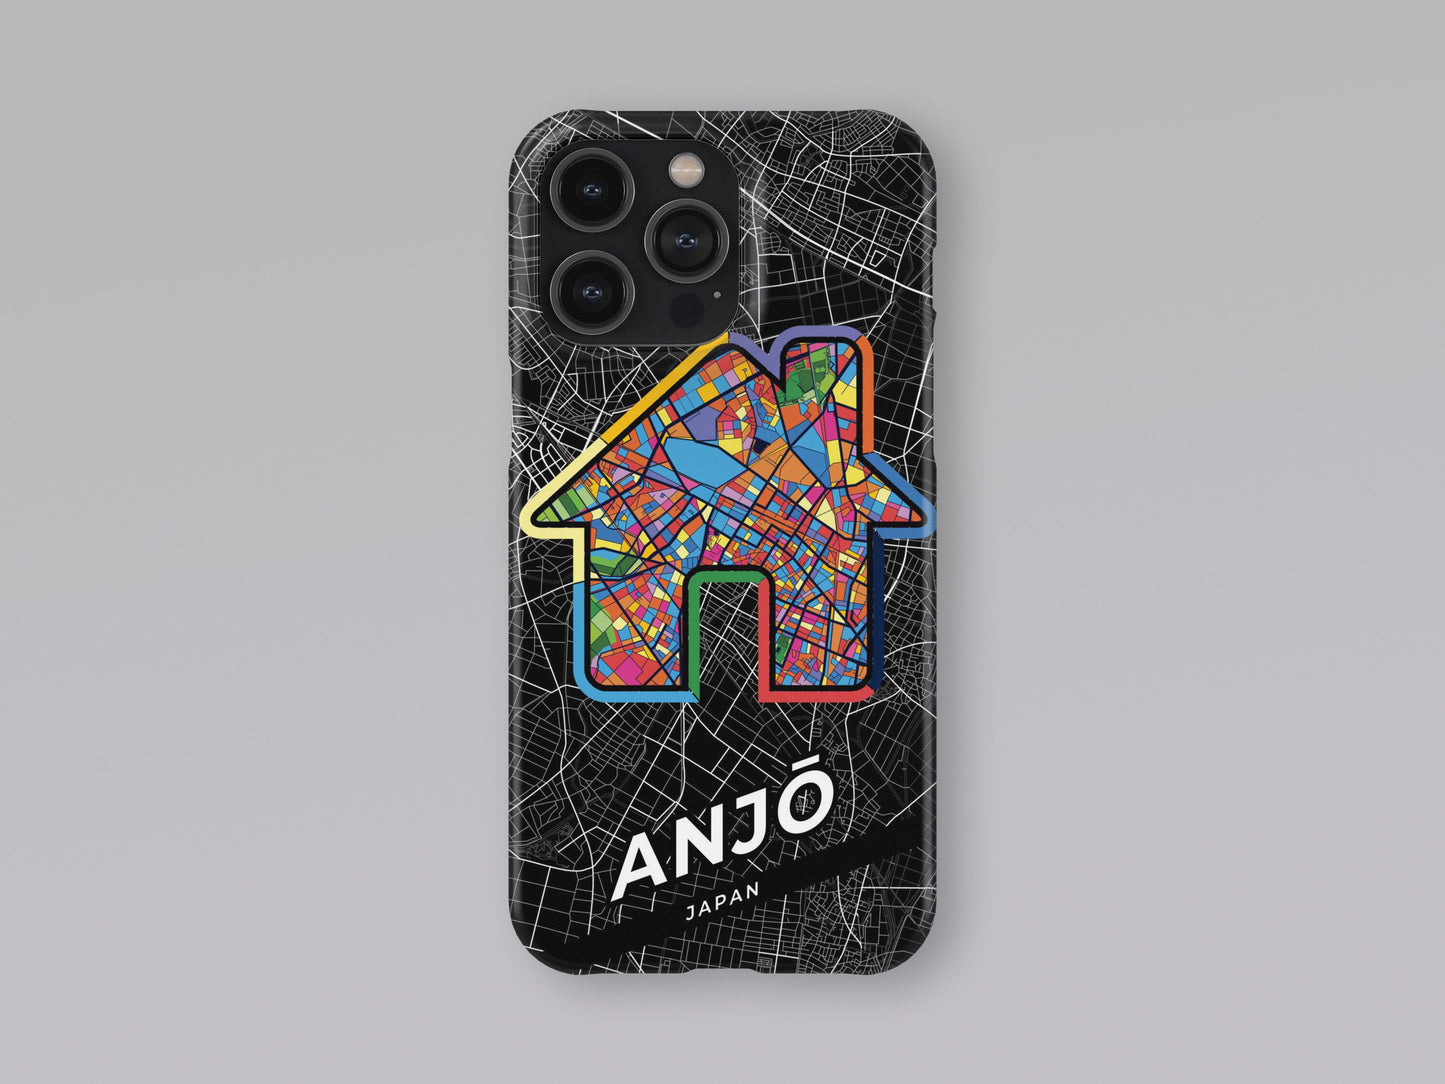 Anjō Japan slim phone case with colorful icon. Birthday, wedding or housewarming gift. Couple match cases. 3